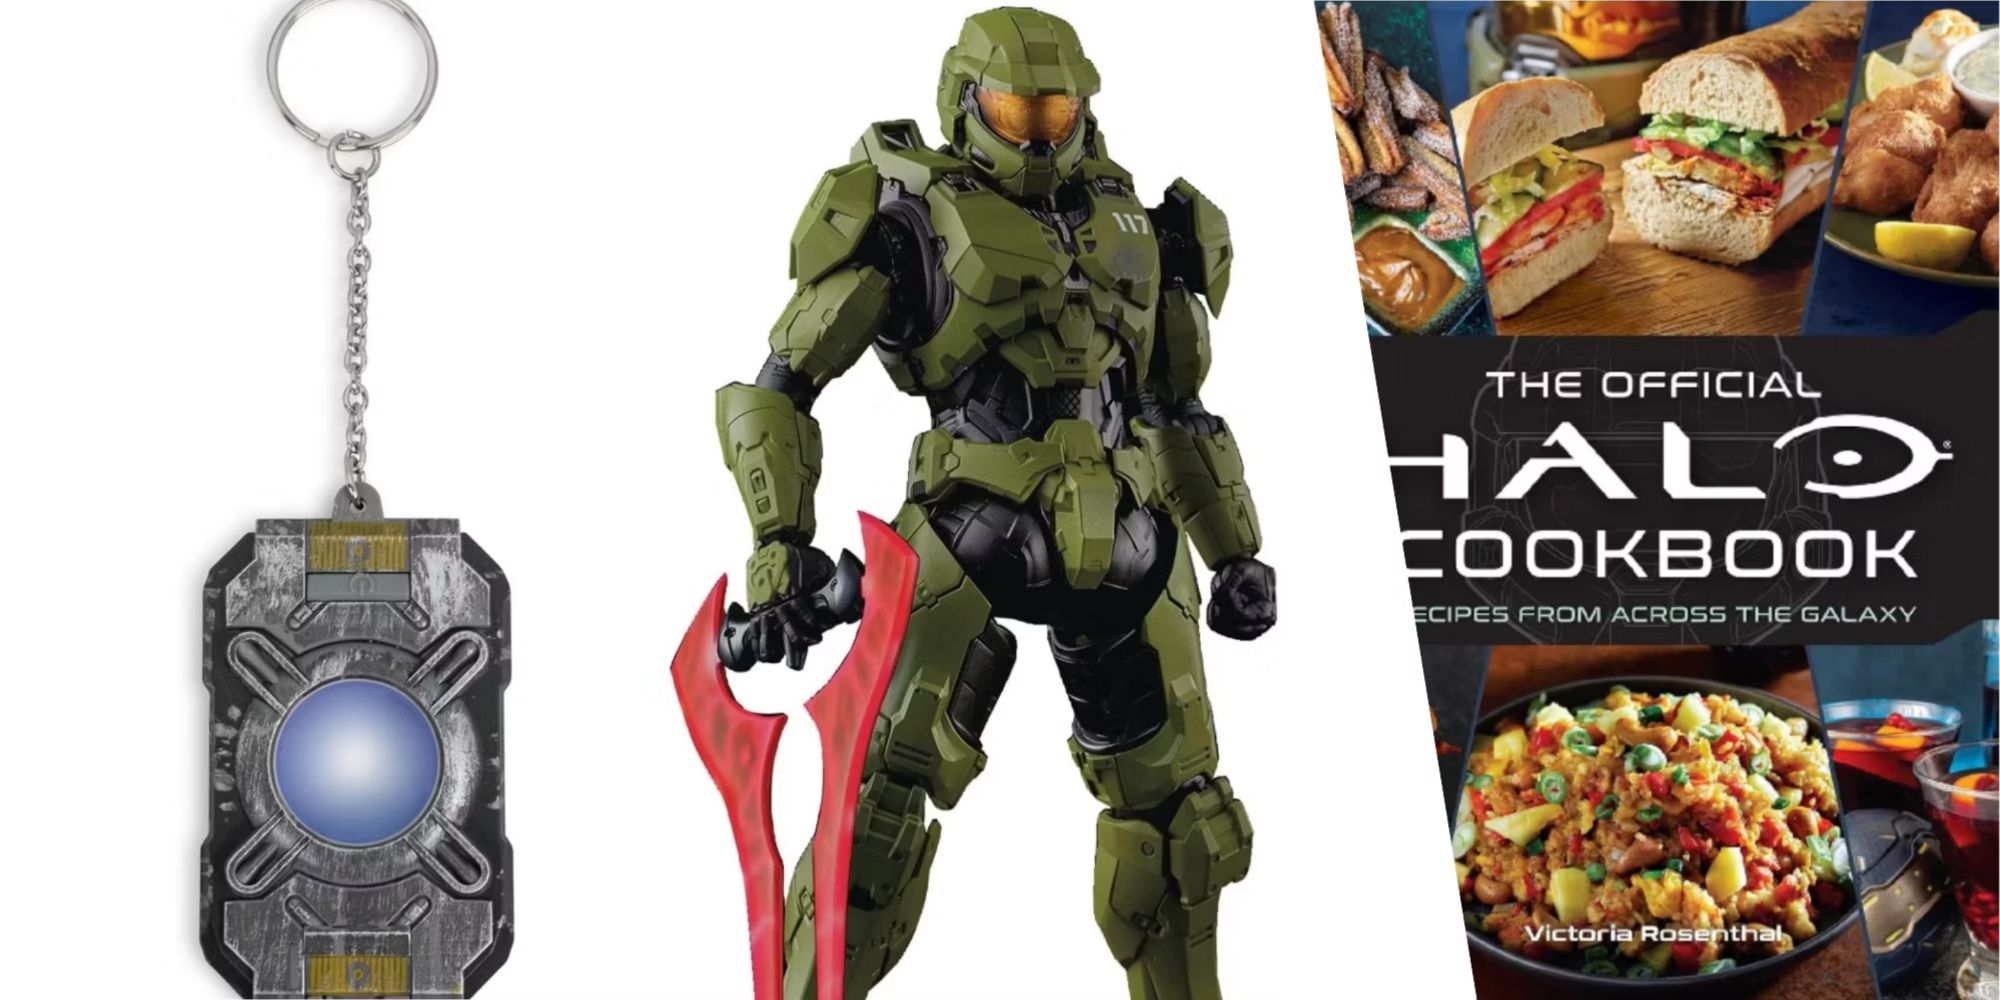 Halo Merch side by side featuring a Cortana Chip Replica, master chief figure and Halo cookbook